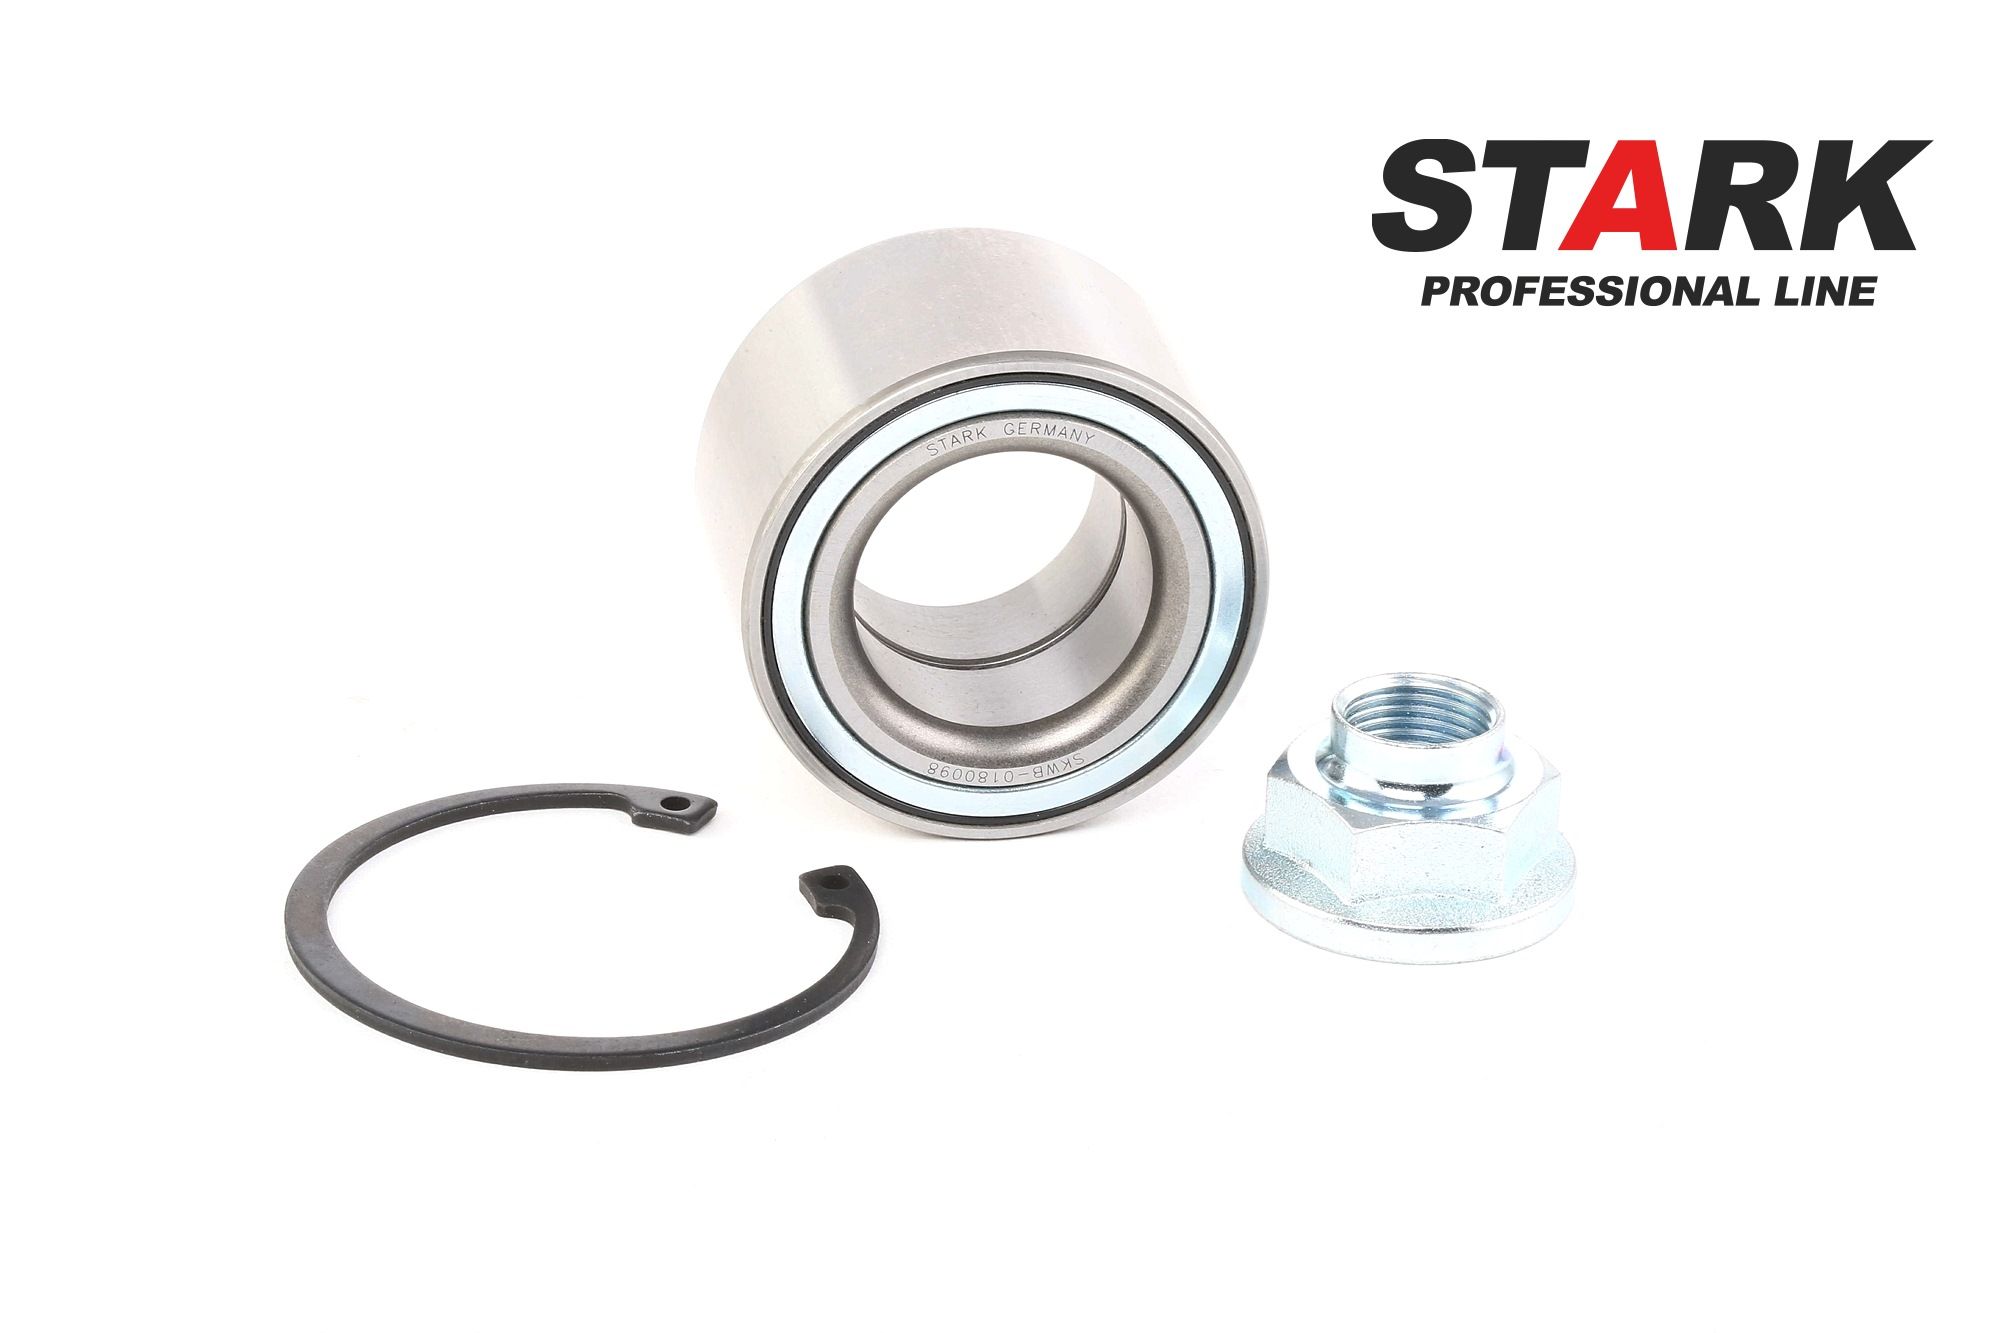 STARK SKWB-0180098 Wheel bearing kit Front axle both sides, without integrated magnetic sensor ring, 62 mm